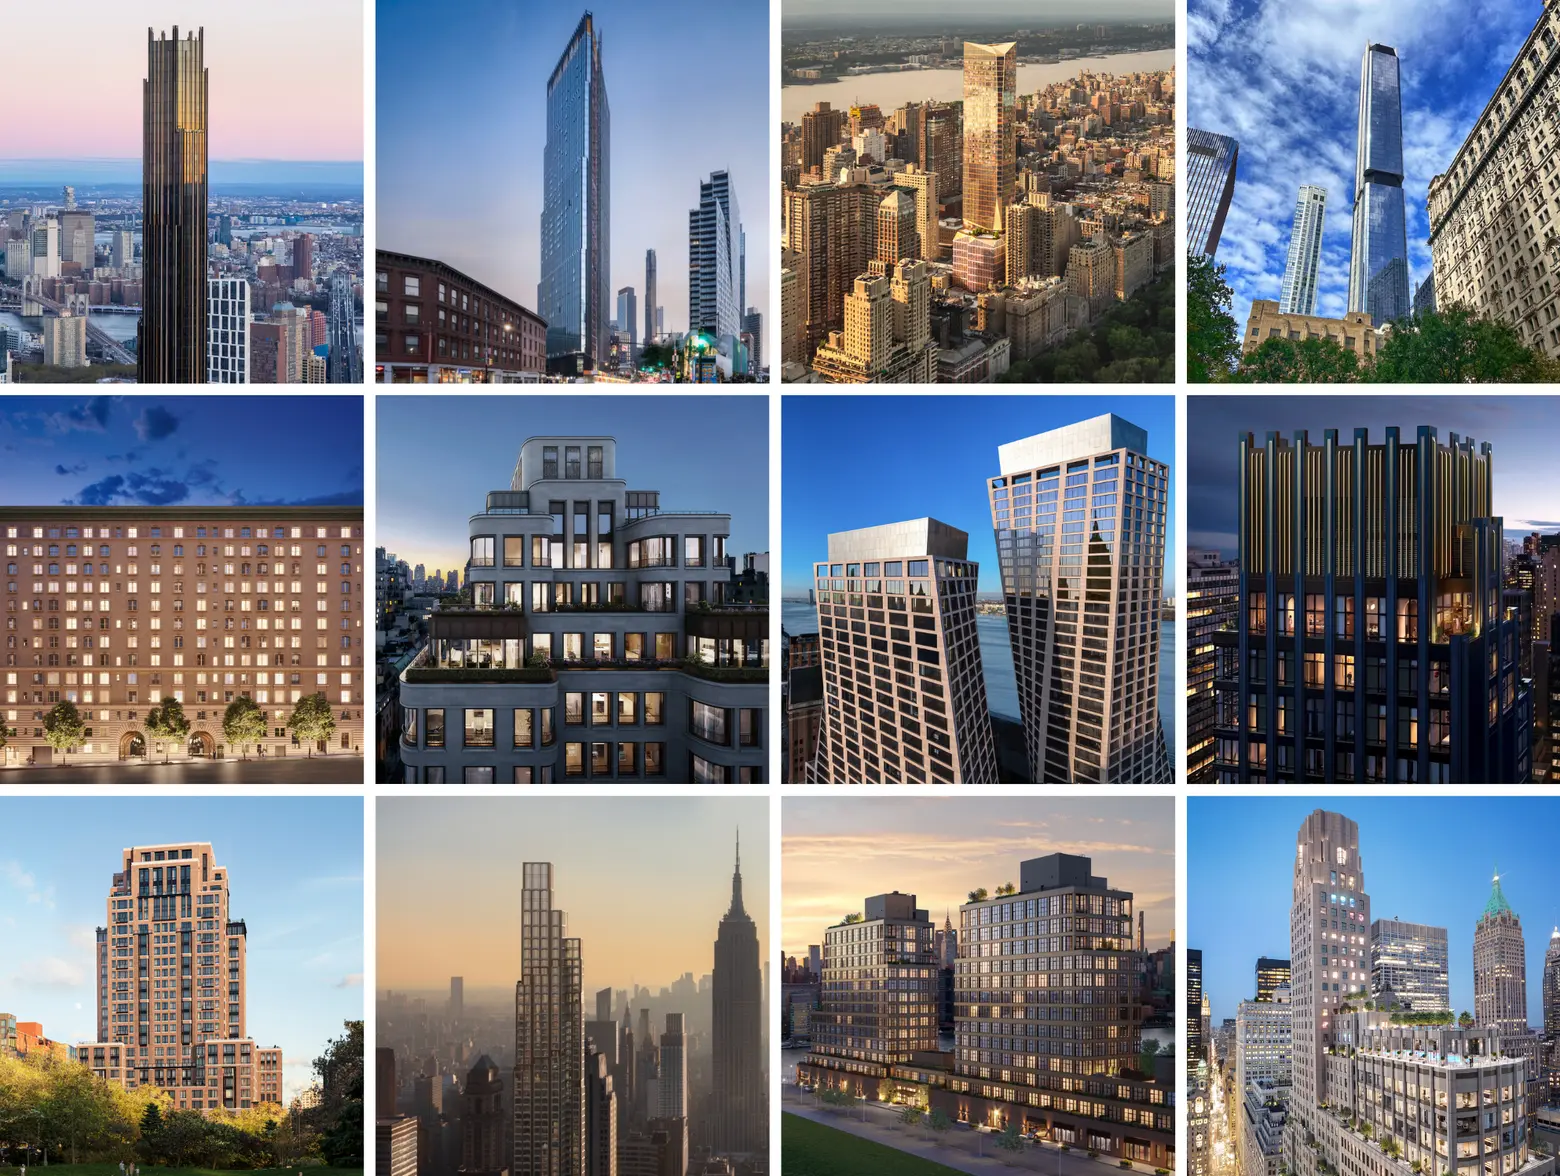 Vote for 6sqft’s 2023 Building of the Year!